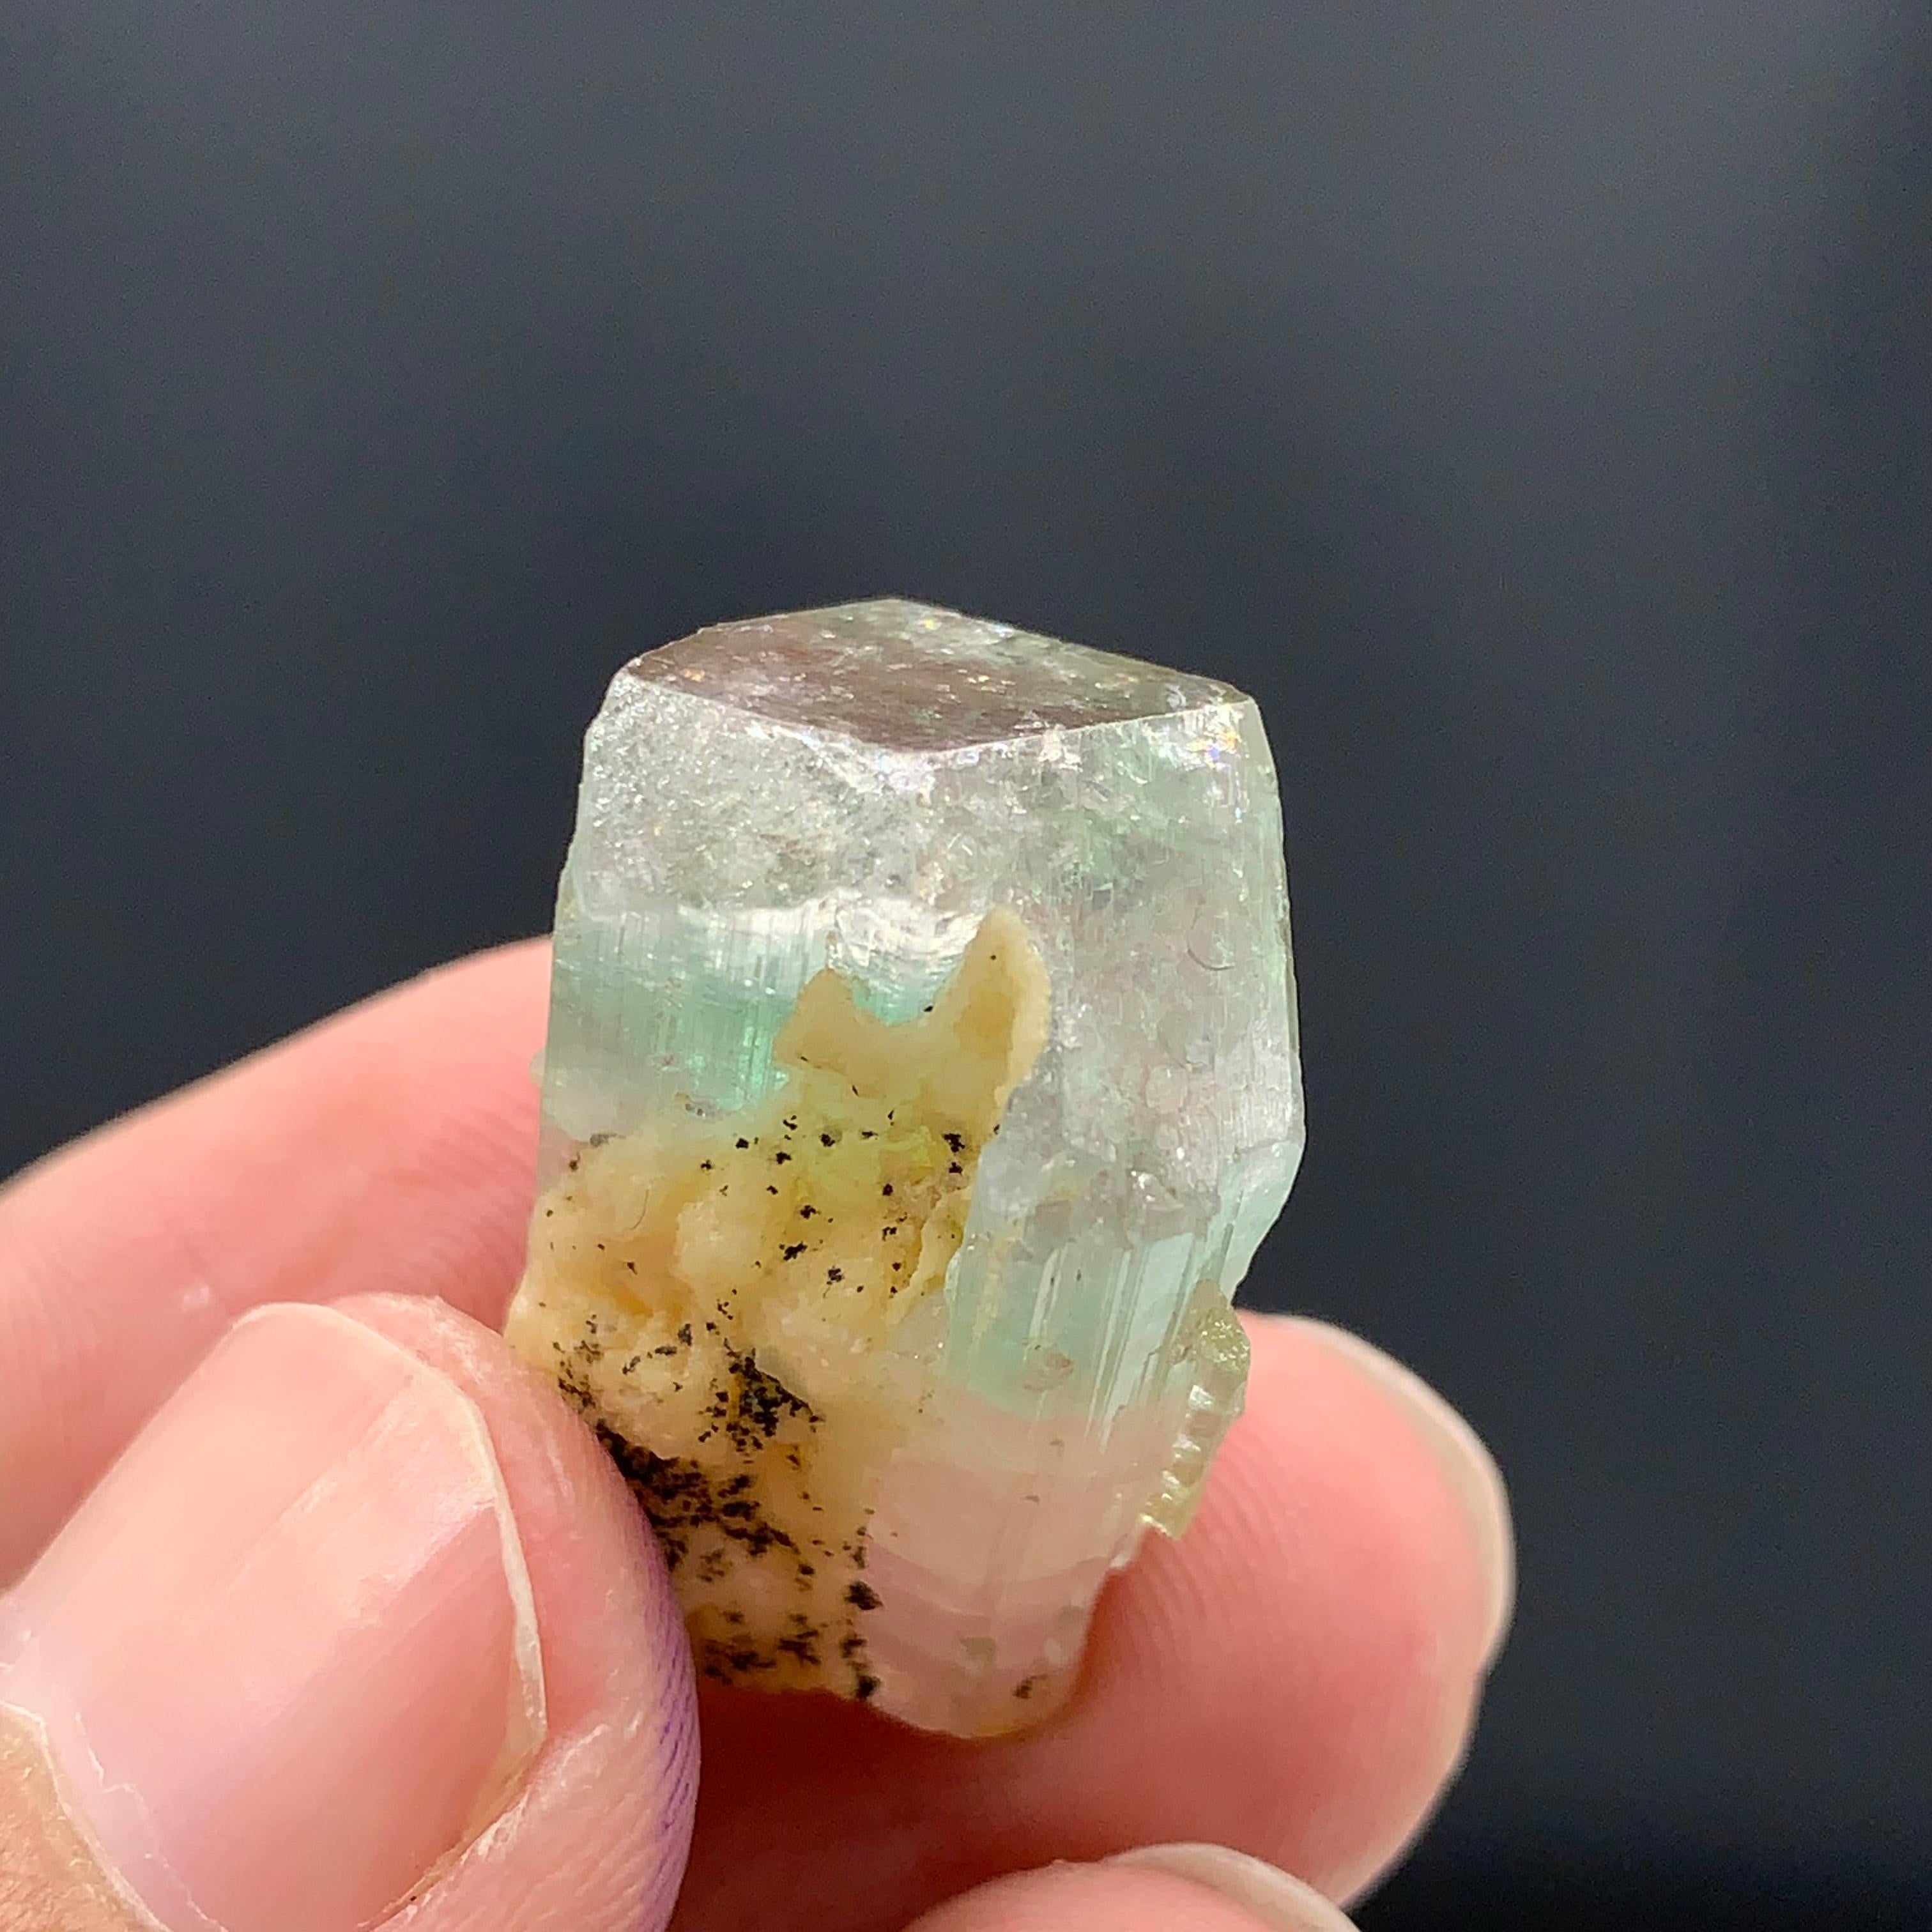 Glamorous Bi Color Tourmaline Specimen From Afghanistan 
Weight: 43.15 Carat
Dim: 2.5 x 1.5 x 1.7 Cm
Color : Peach and Mint Green 
Origin : Afghanistan 

Tourmaline is a crystalline silicate mineral group in which boron is compounded with elements